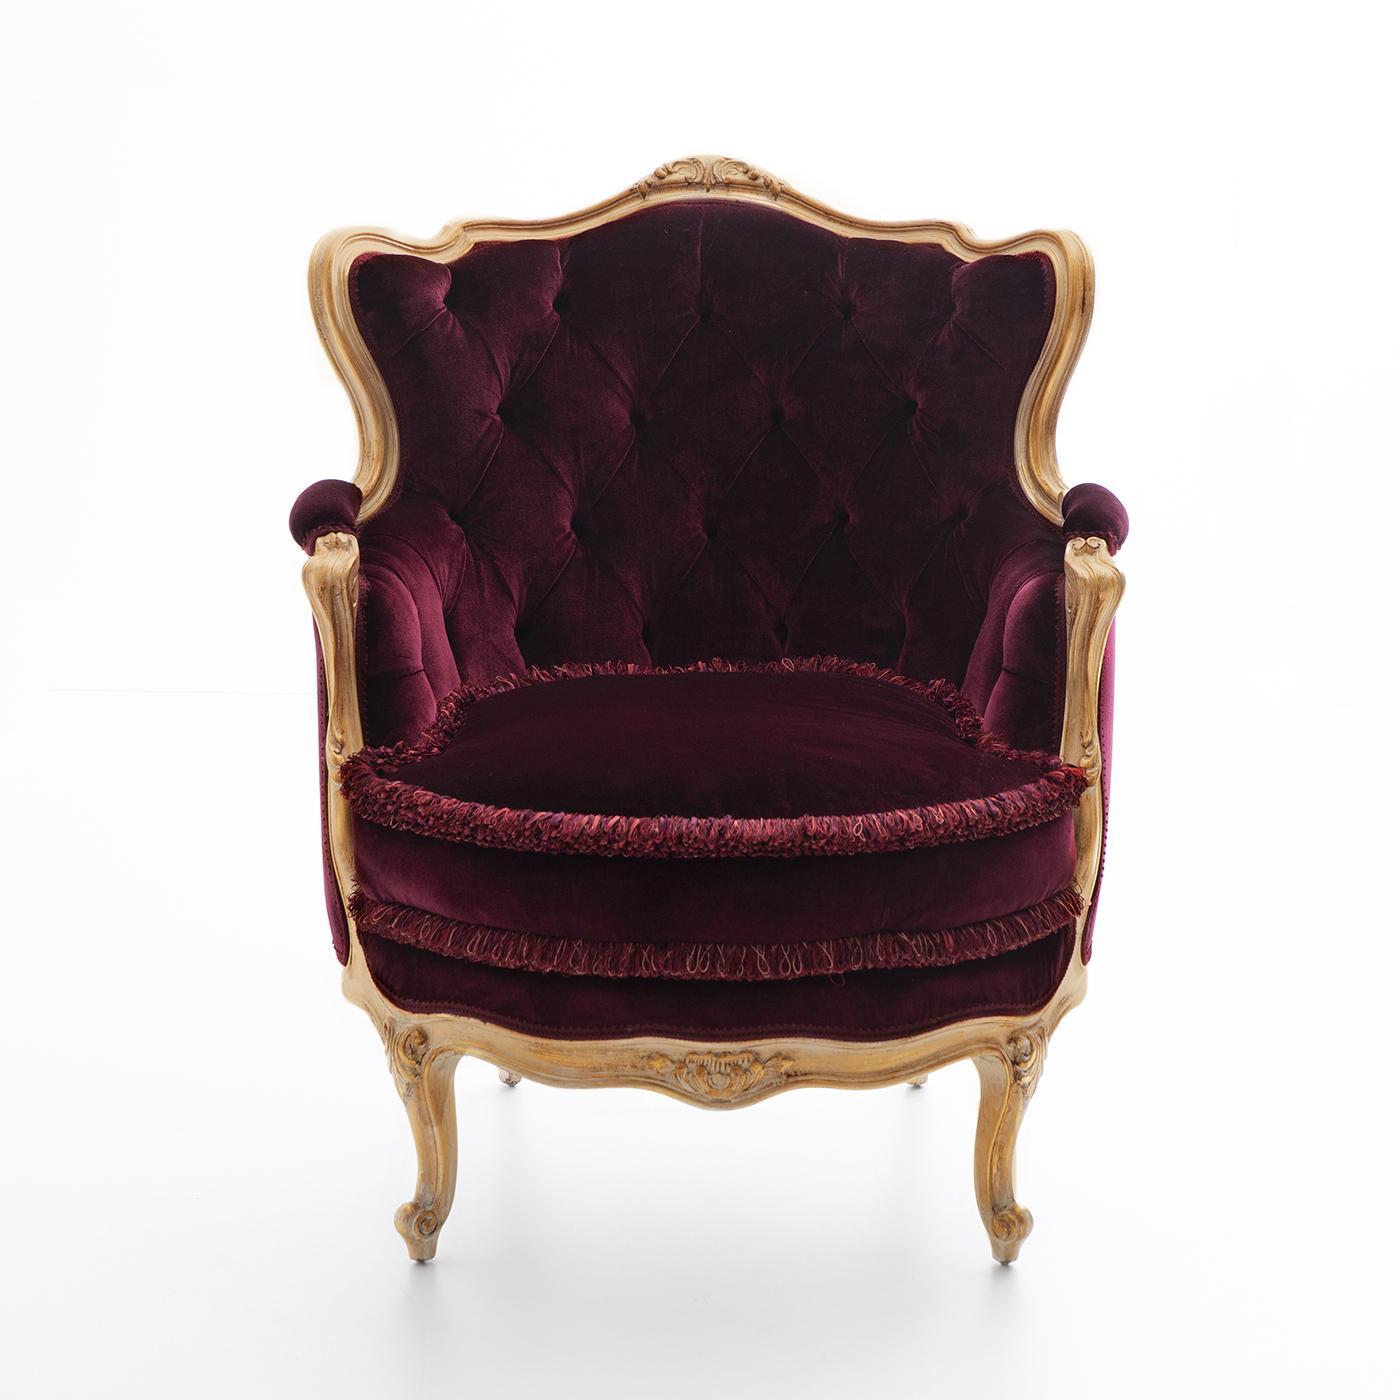 This luxurious armchair in perfect Louis XV style, is sure to stand out in any decor with its bold character. Its seductive and ornate profile is accented by the gold-leaf coating lacquered in white and brown, creating a finish of unexpected